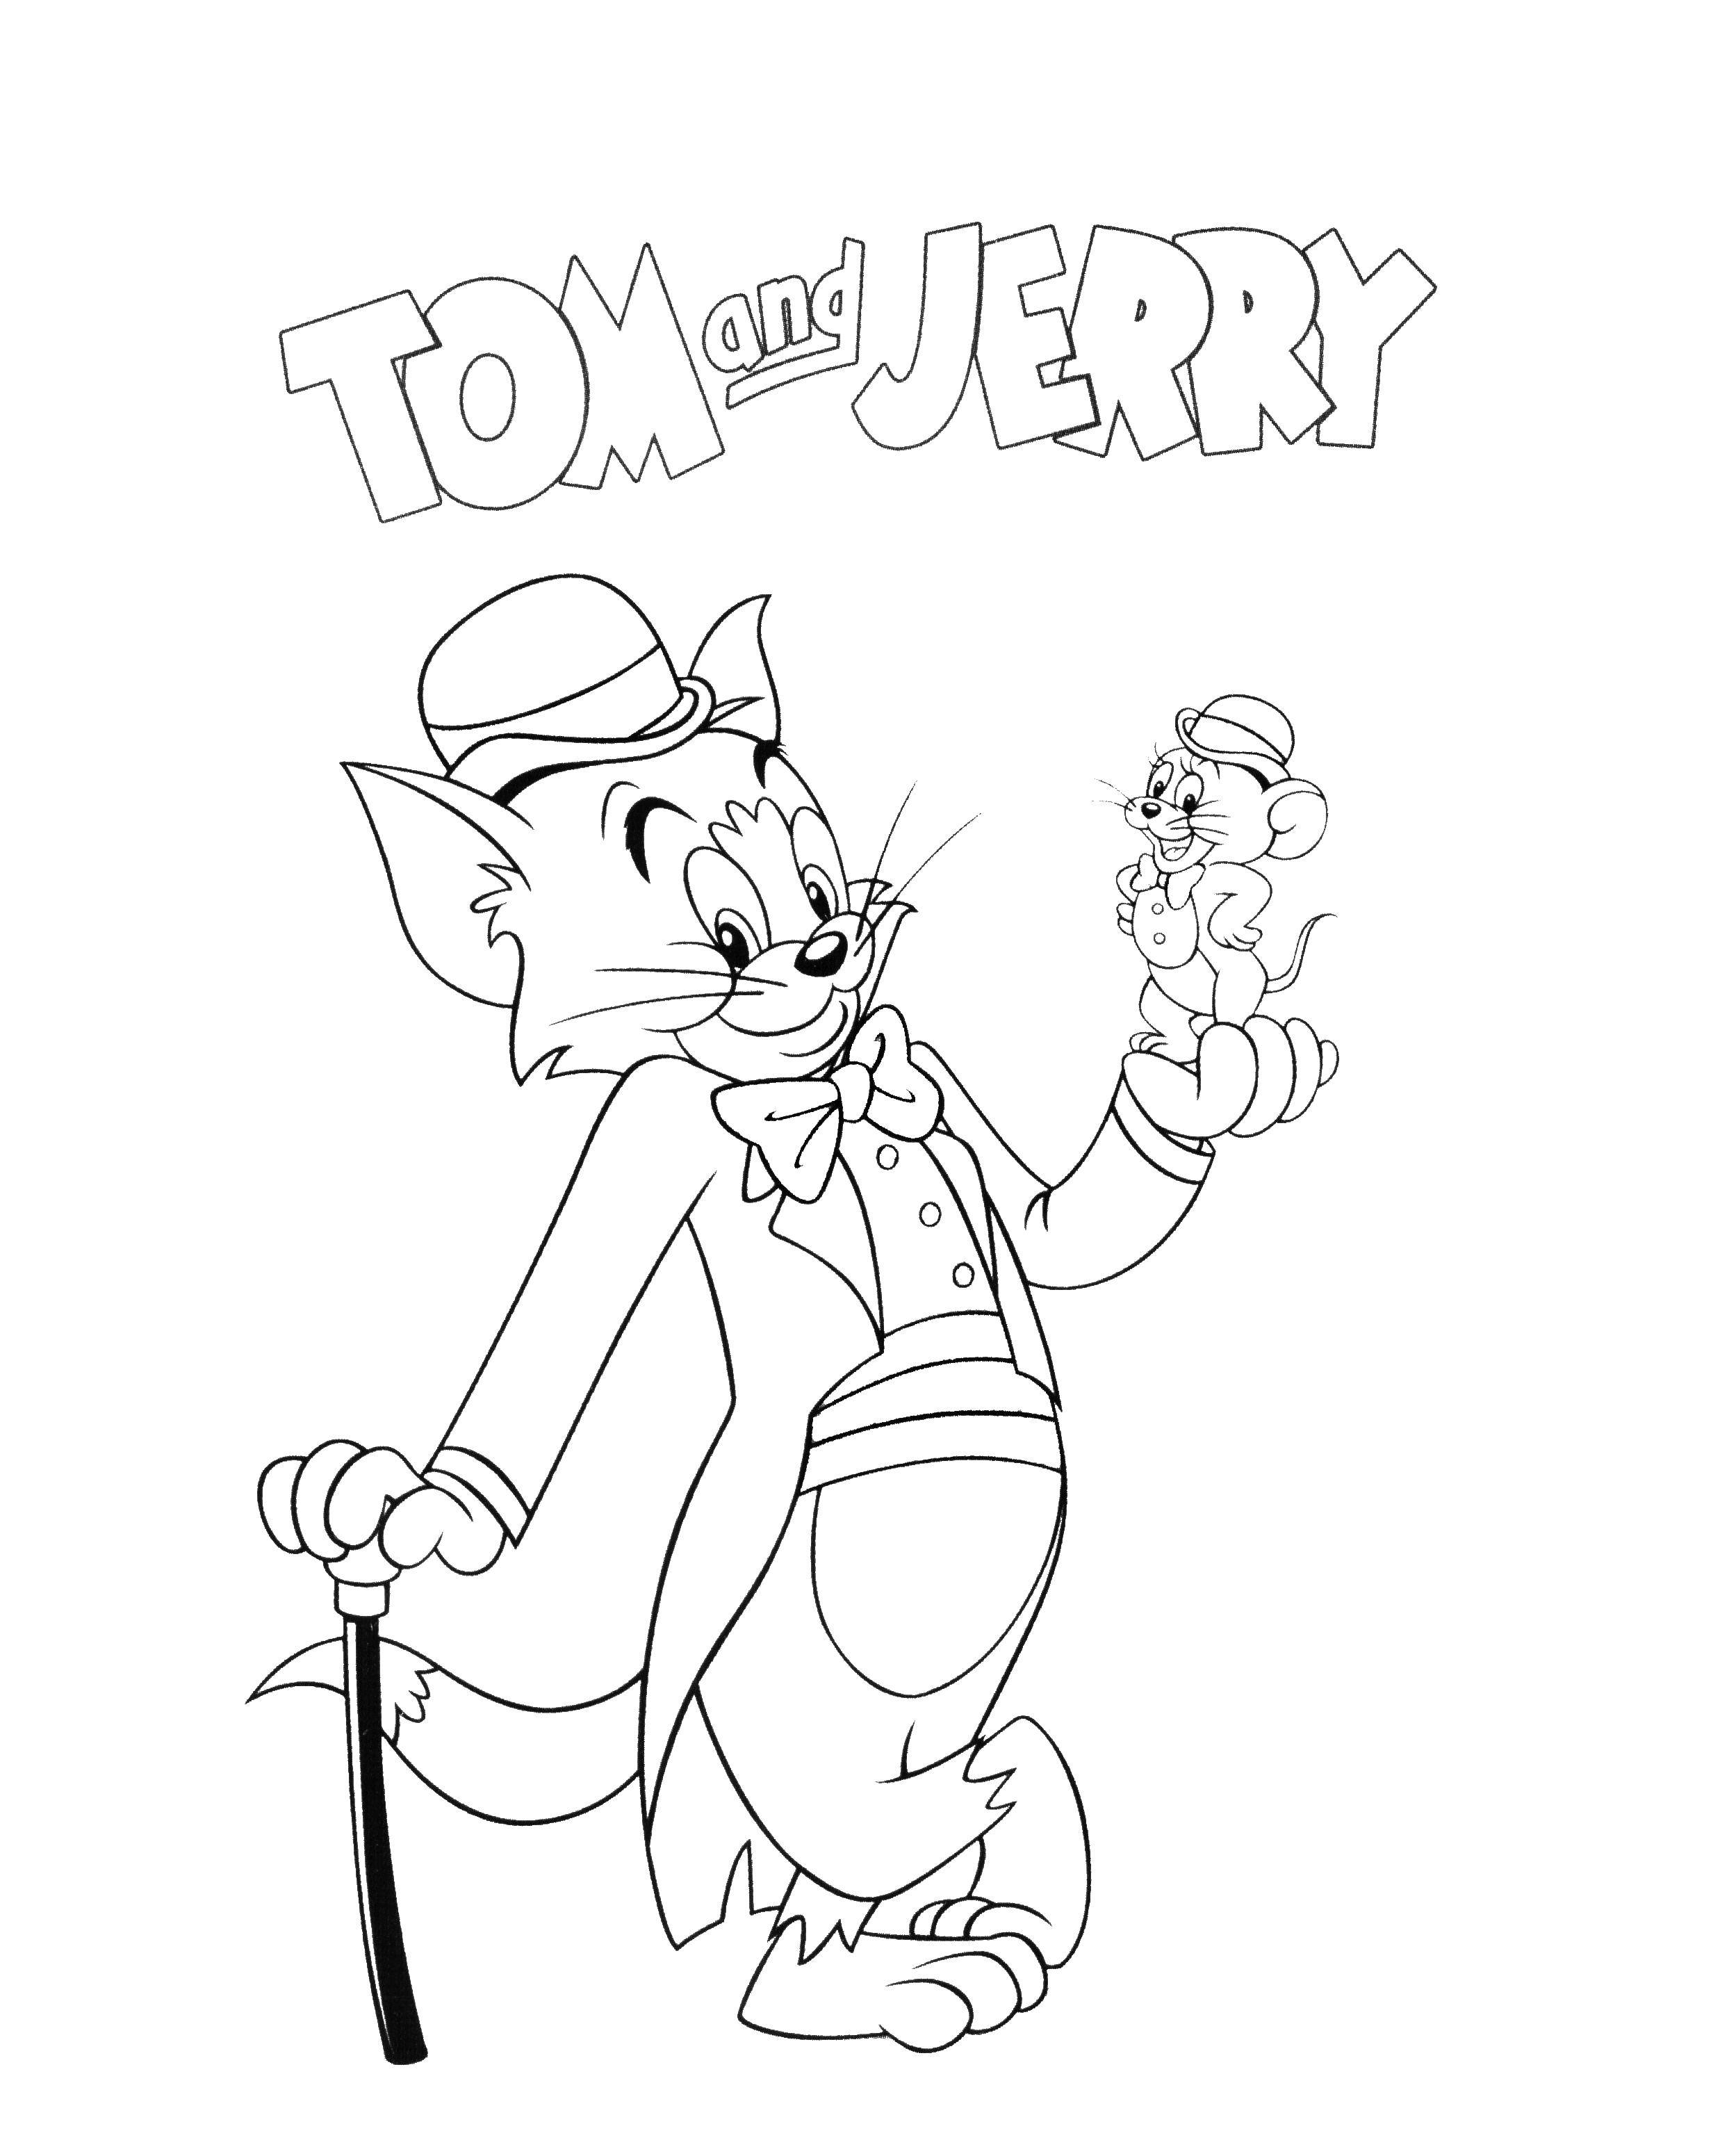 Coloring Tom and Jerry. Category cartoons. Tags:  Character cartoon, Tom and Jerry.